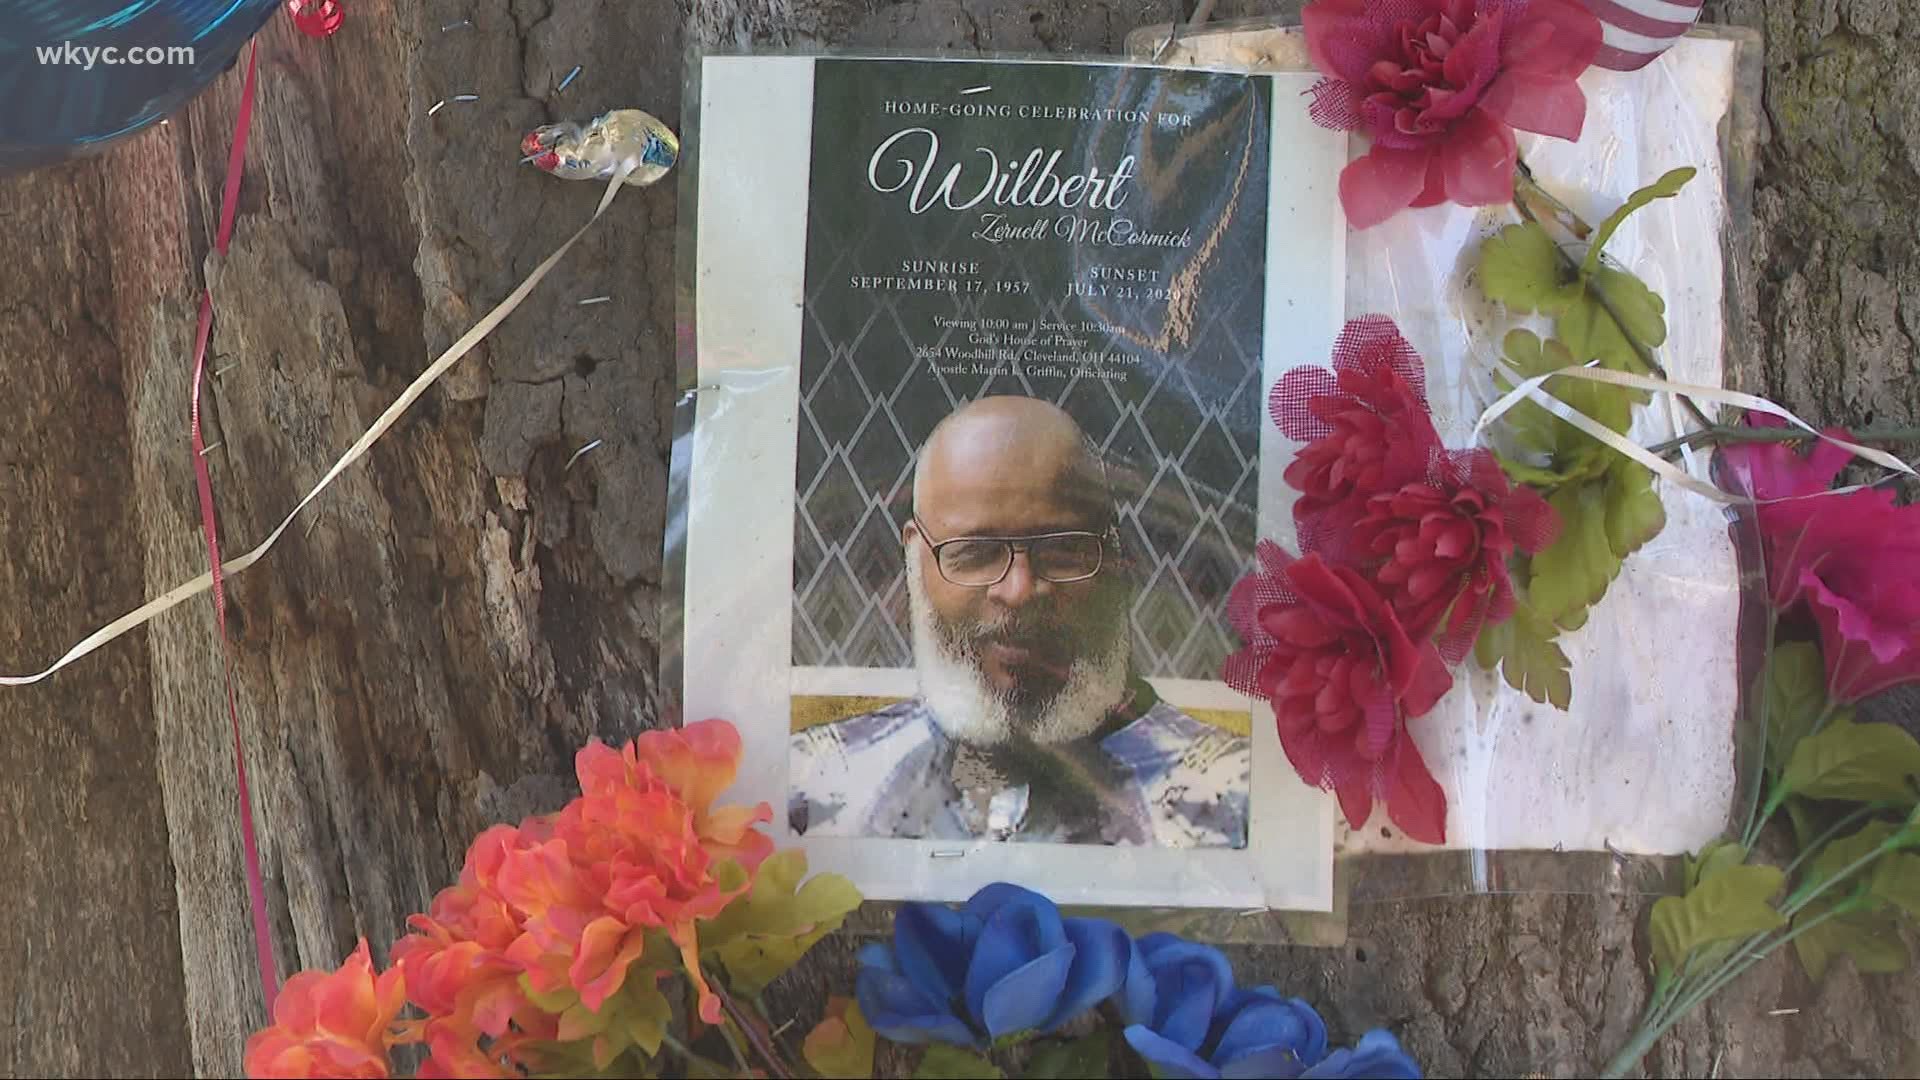 Wilbert McCormick was gunned down last July while walking with his wife in Forest Hills Park. His killer is still on the loose.